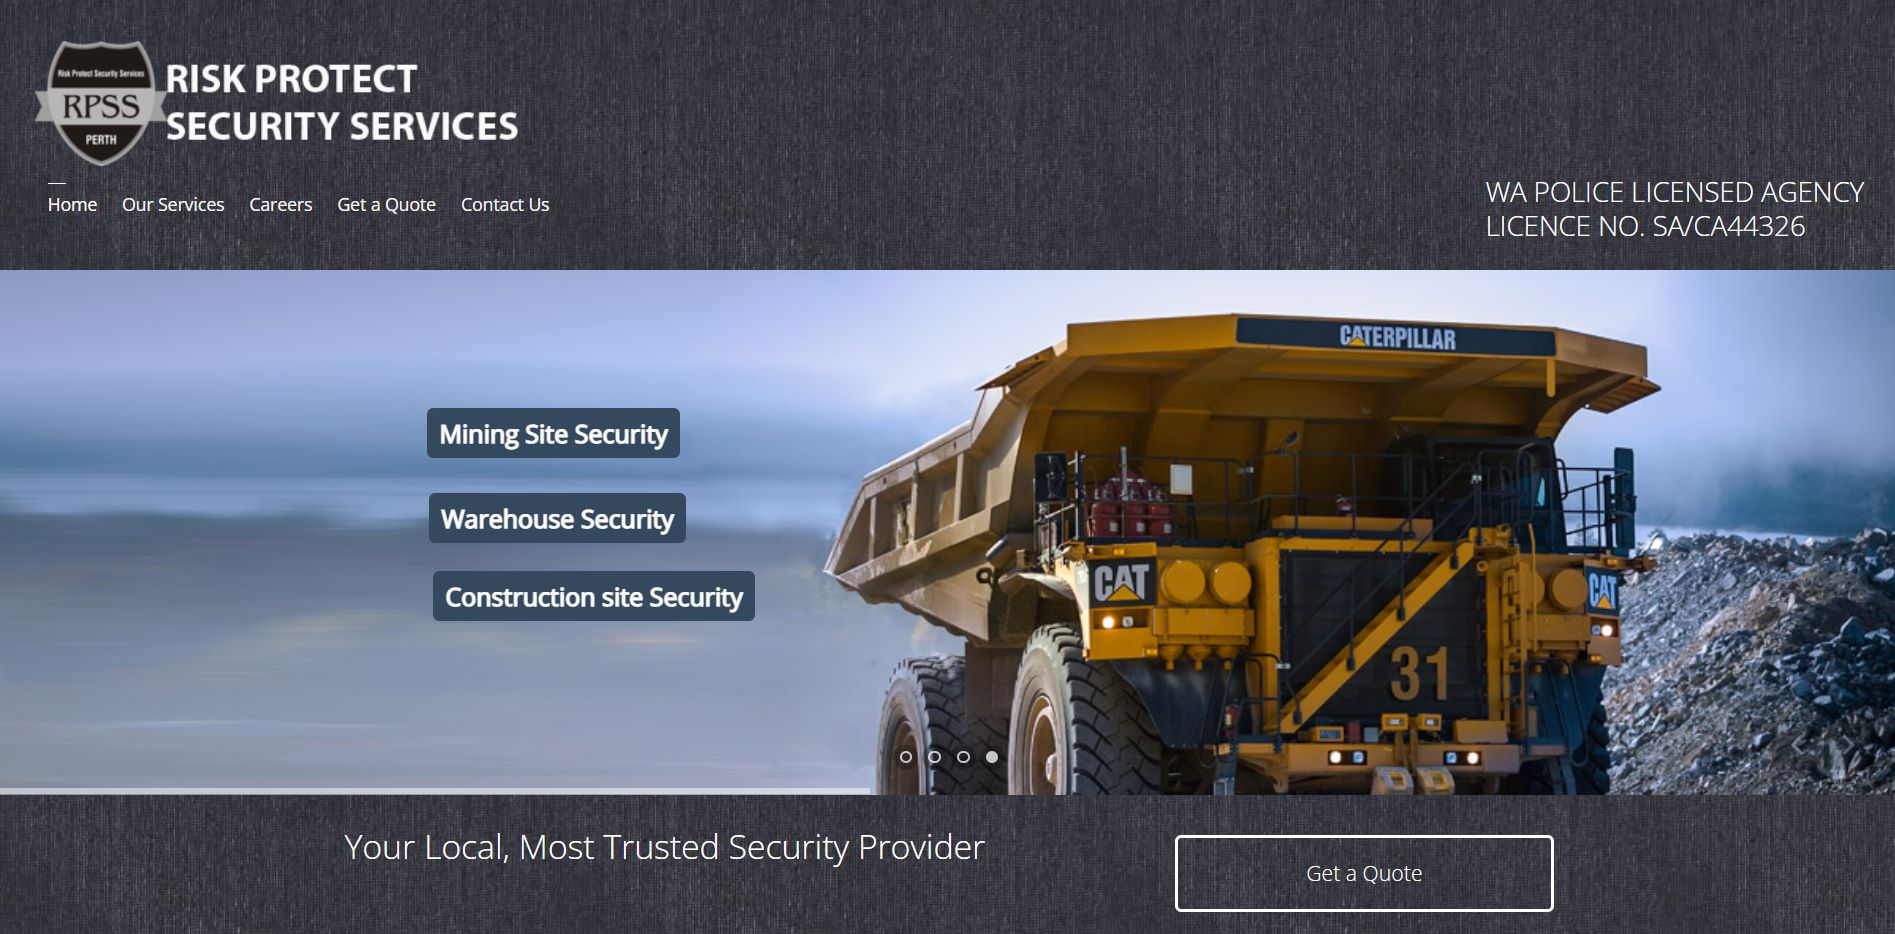 risk protect security services